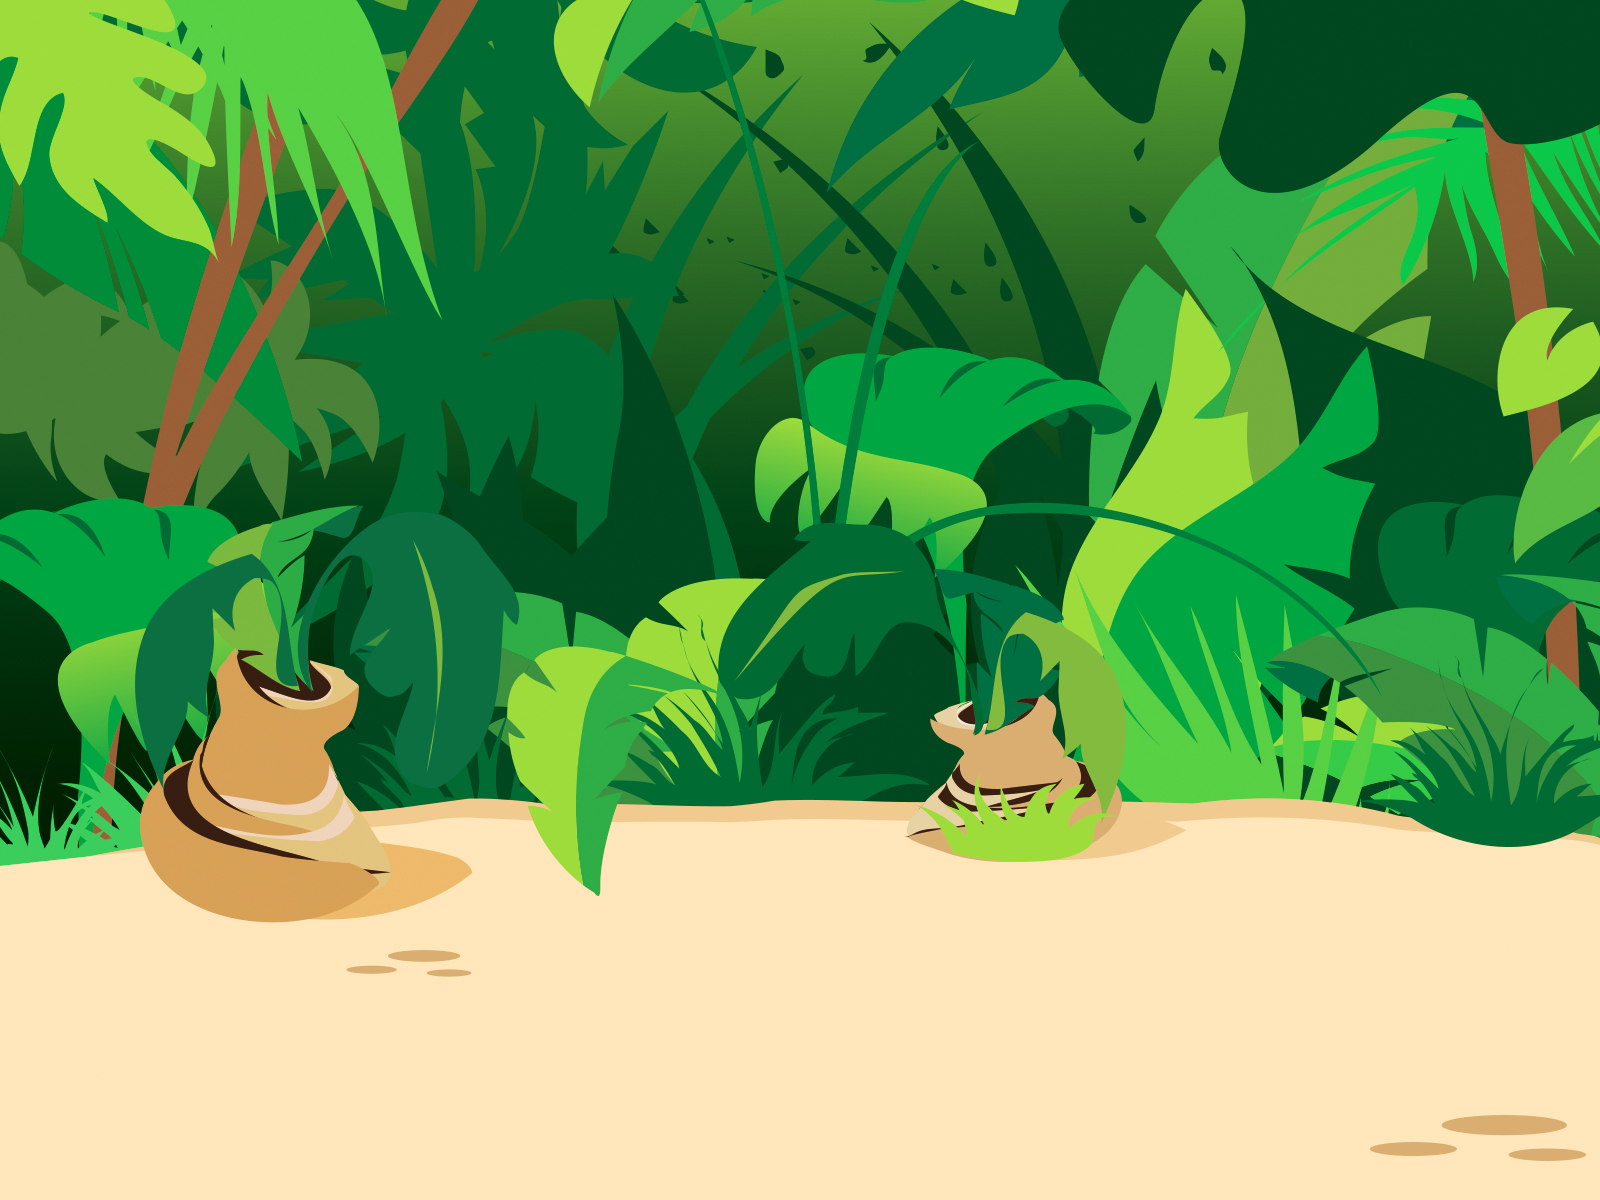 Jungle Plants Backgrounds | Green, Nature Templates | Free PPT Grounds